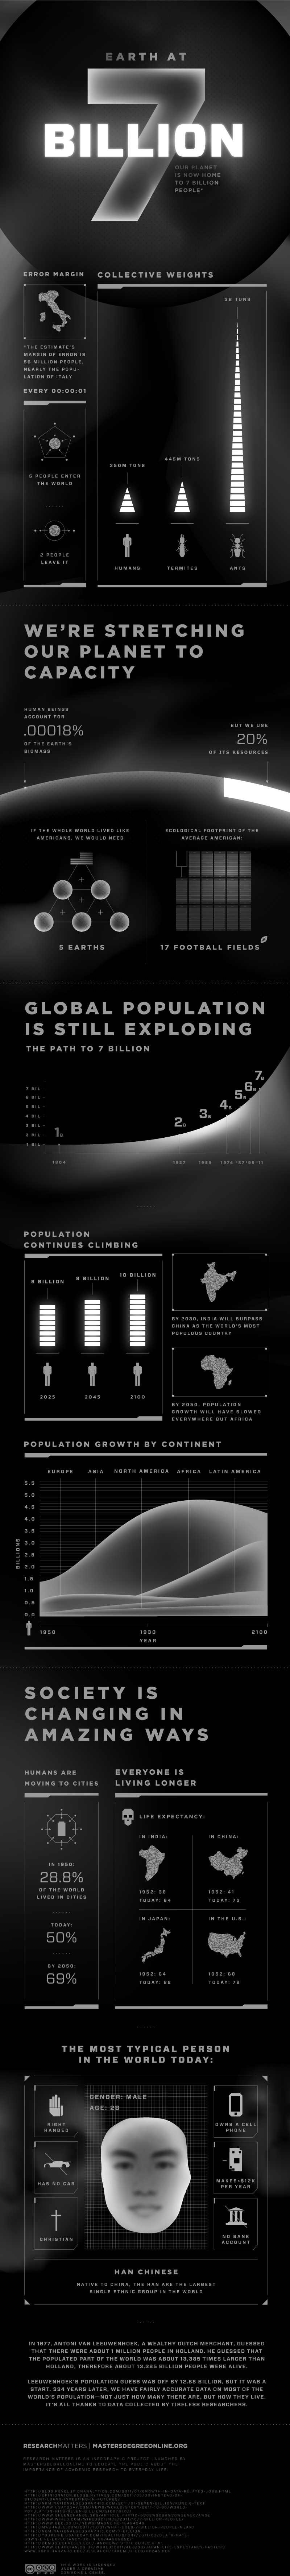 The Earth - and Its Average Inhabitant - at 7 Billion People  Infographic